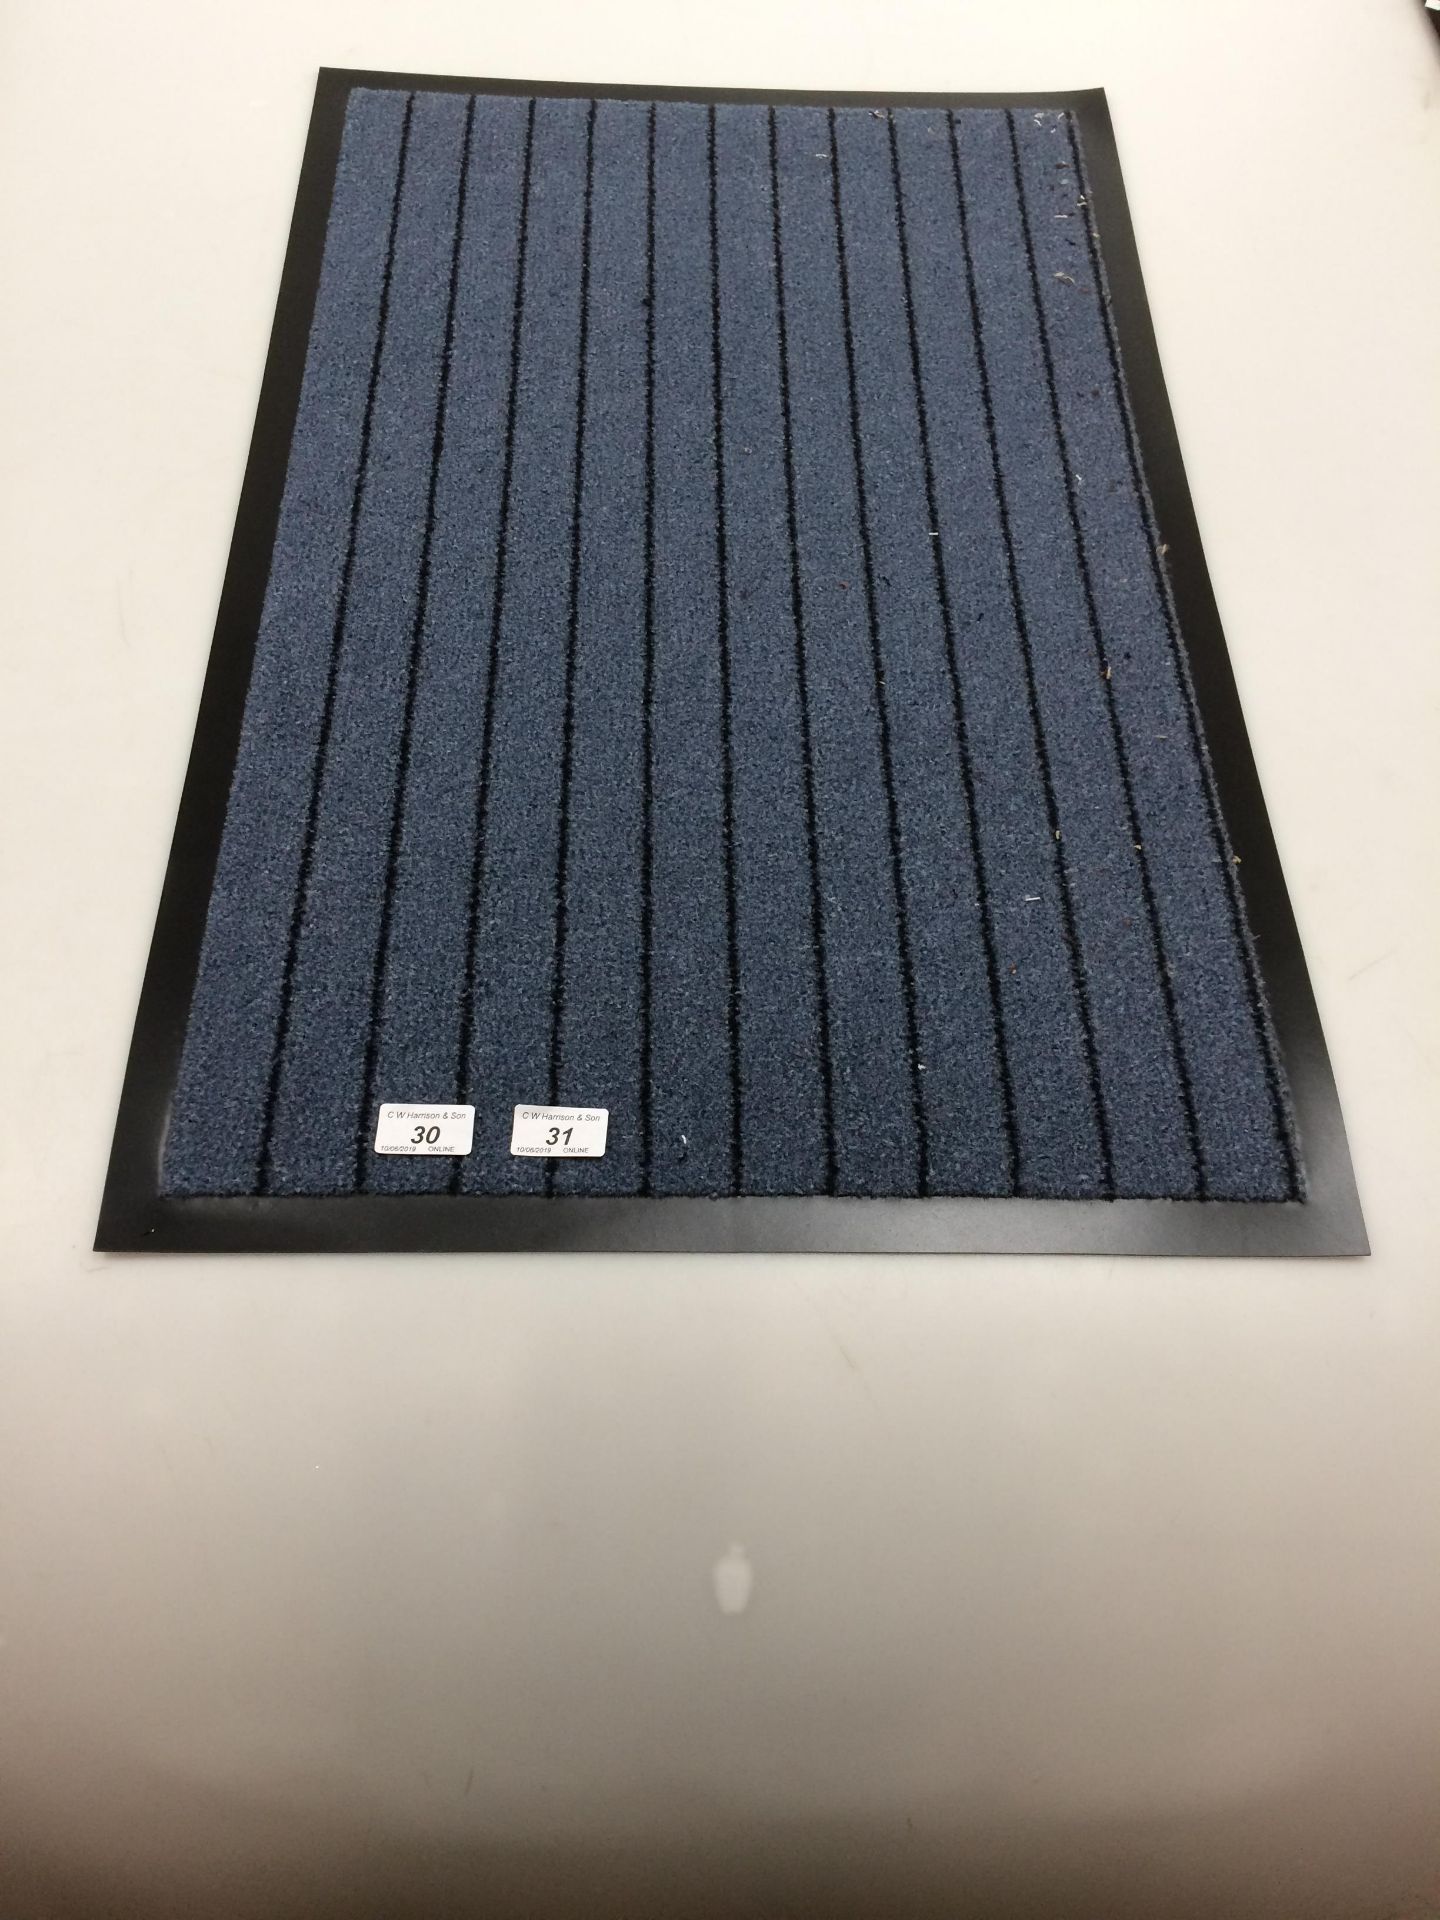 10 x blue and black striped door mats with anti-slip rubber inlay each 50 x 80cm